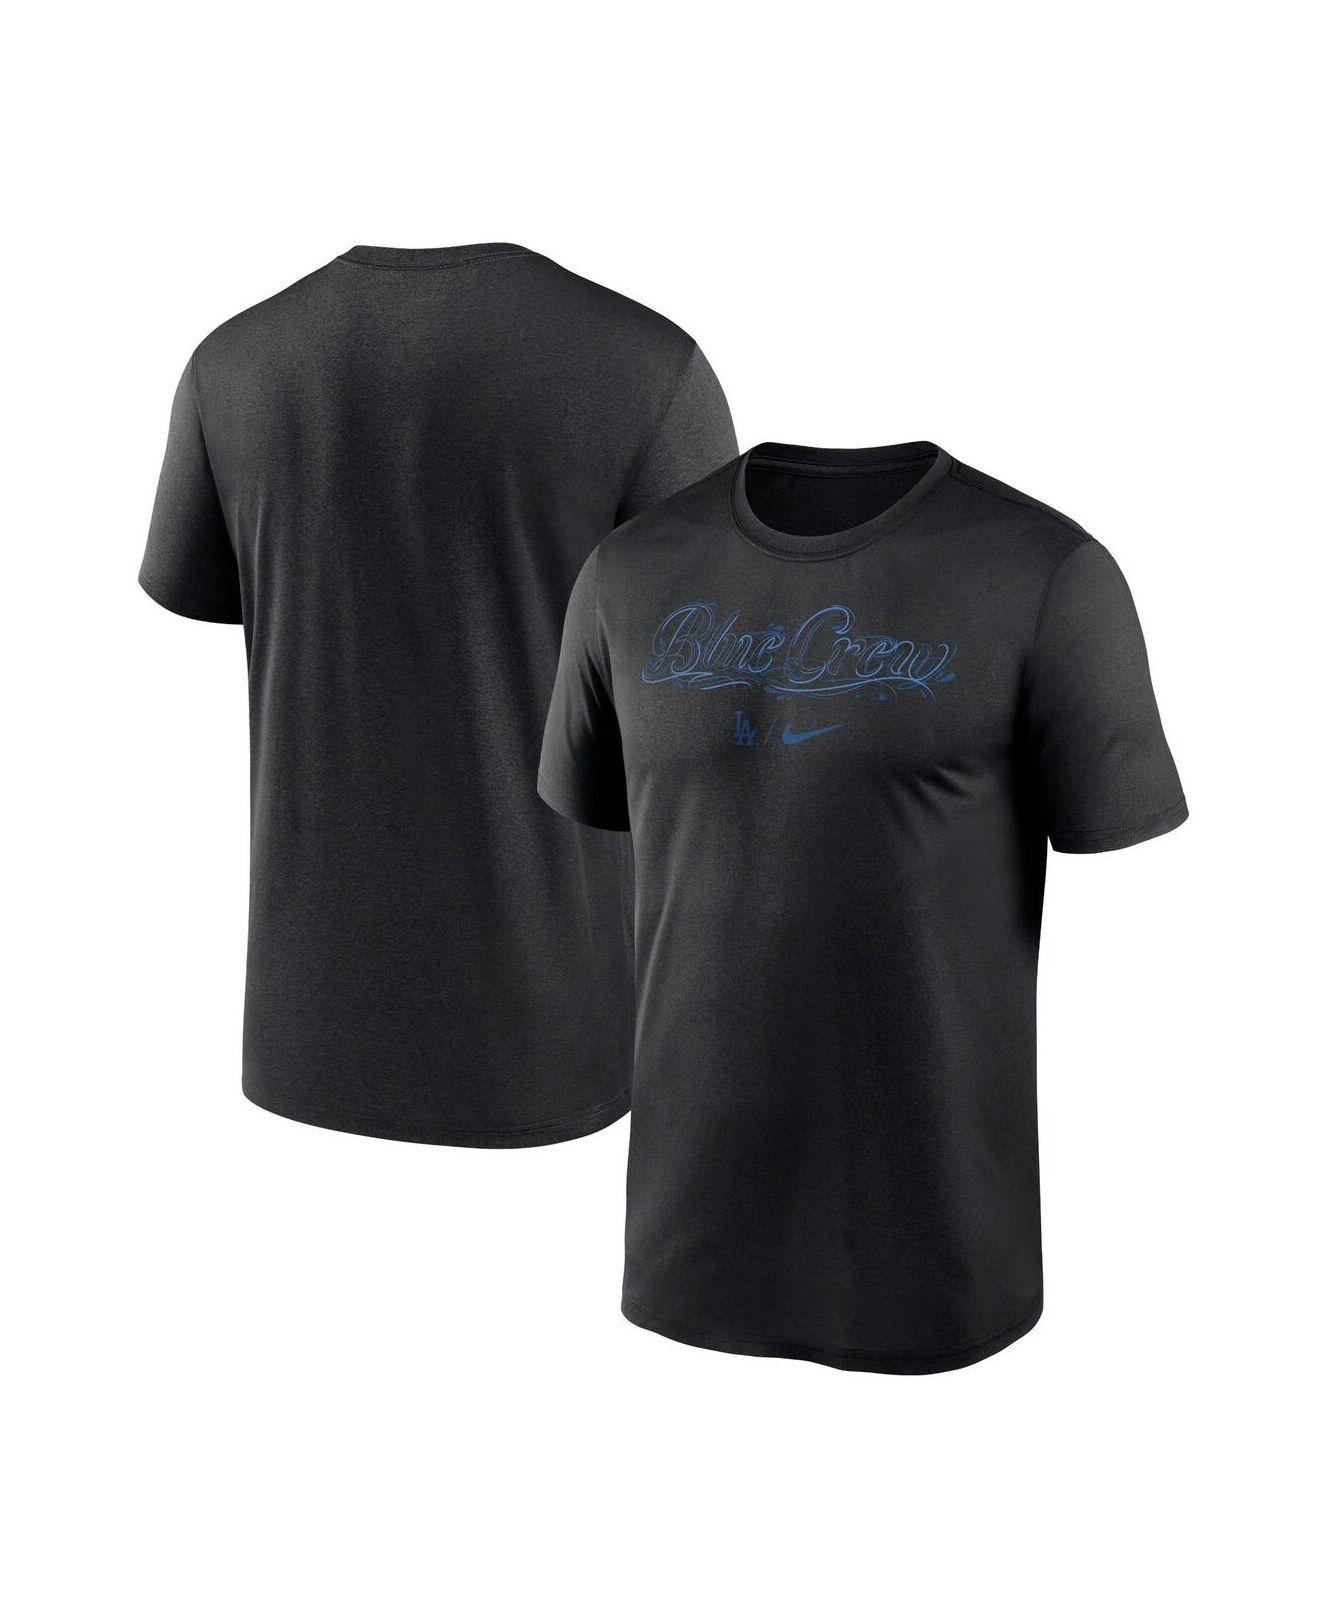 Nike Men's Black Los Angeles Dodgers Authentic Collection Logo Performance  Long Sleeve T-shirt